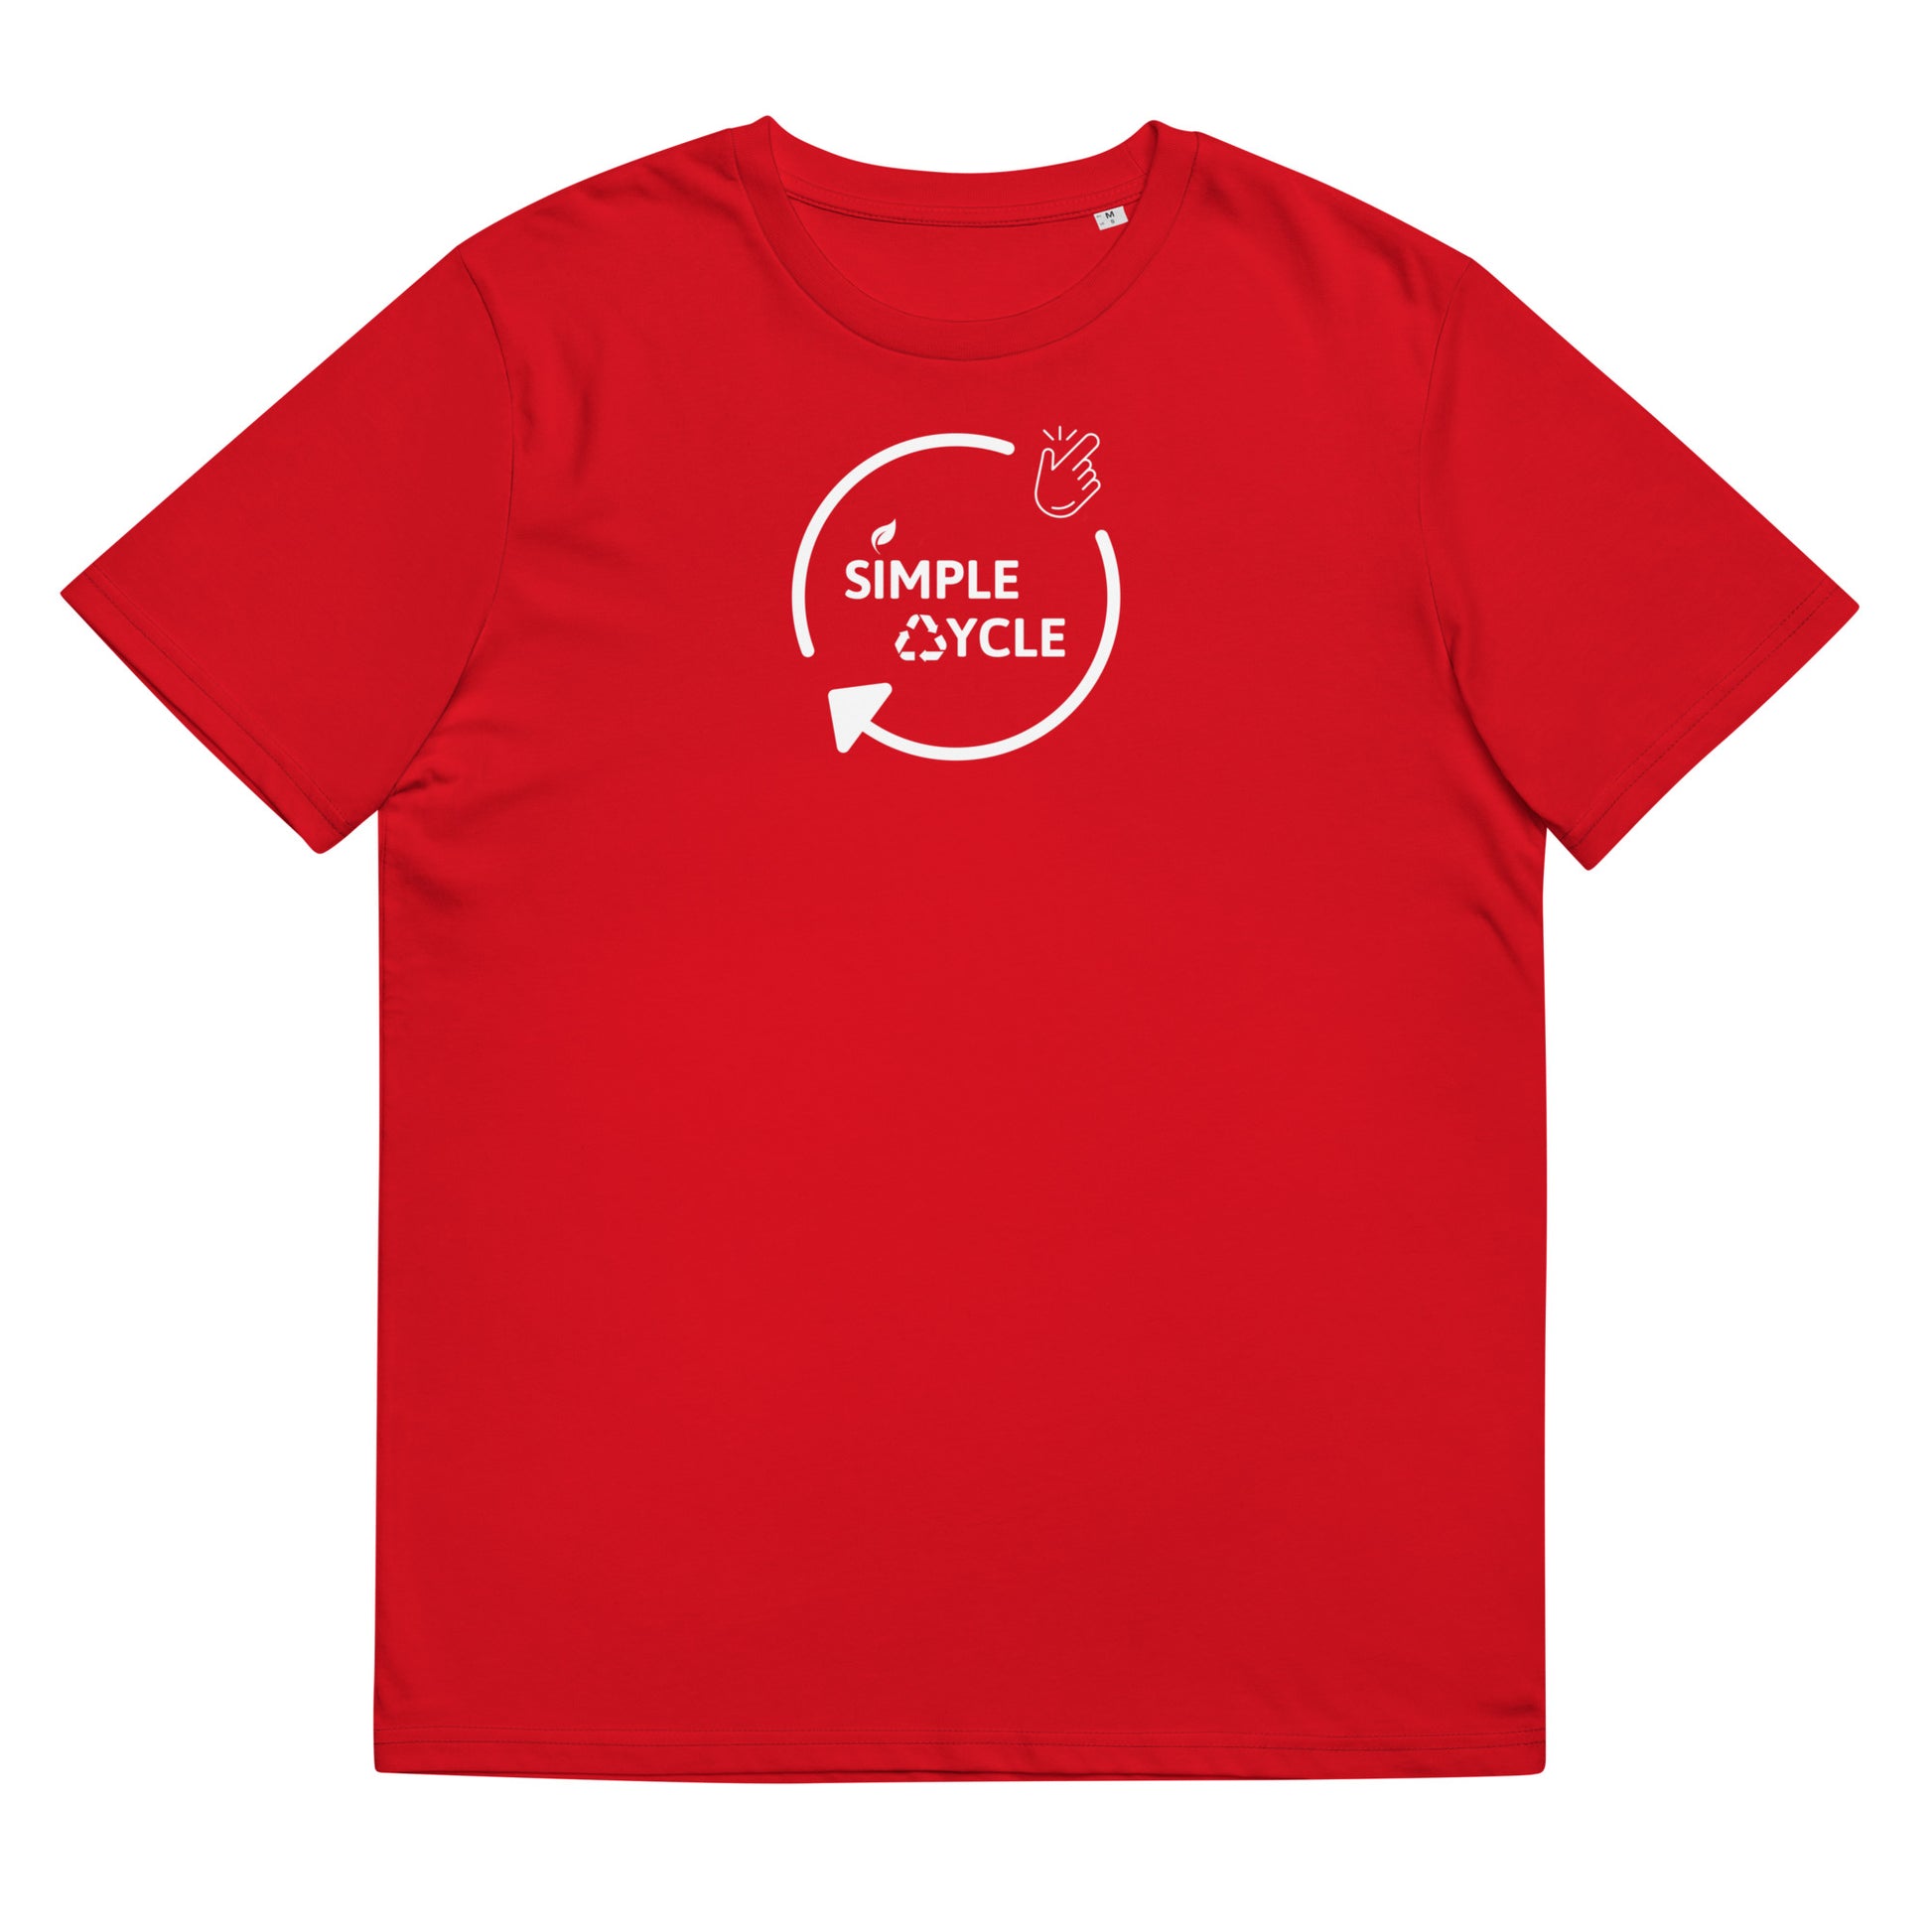 SimpleCycle Unisex Organic Cotton T-Shirt bright red